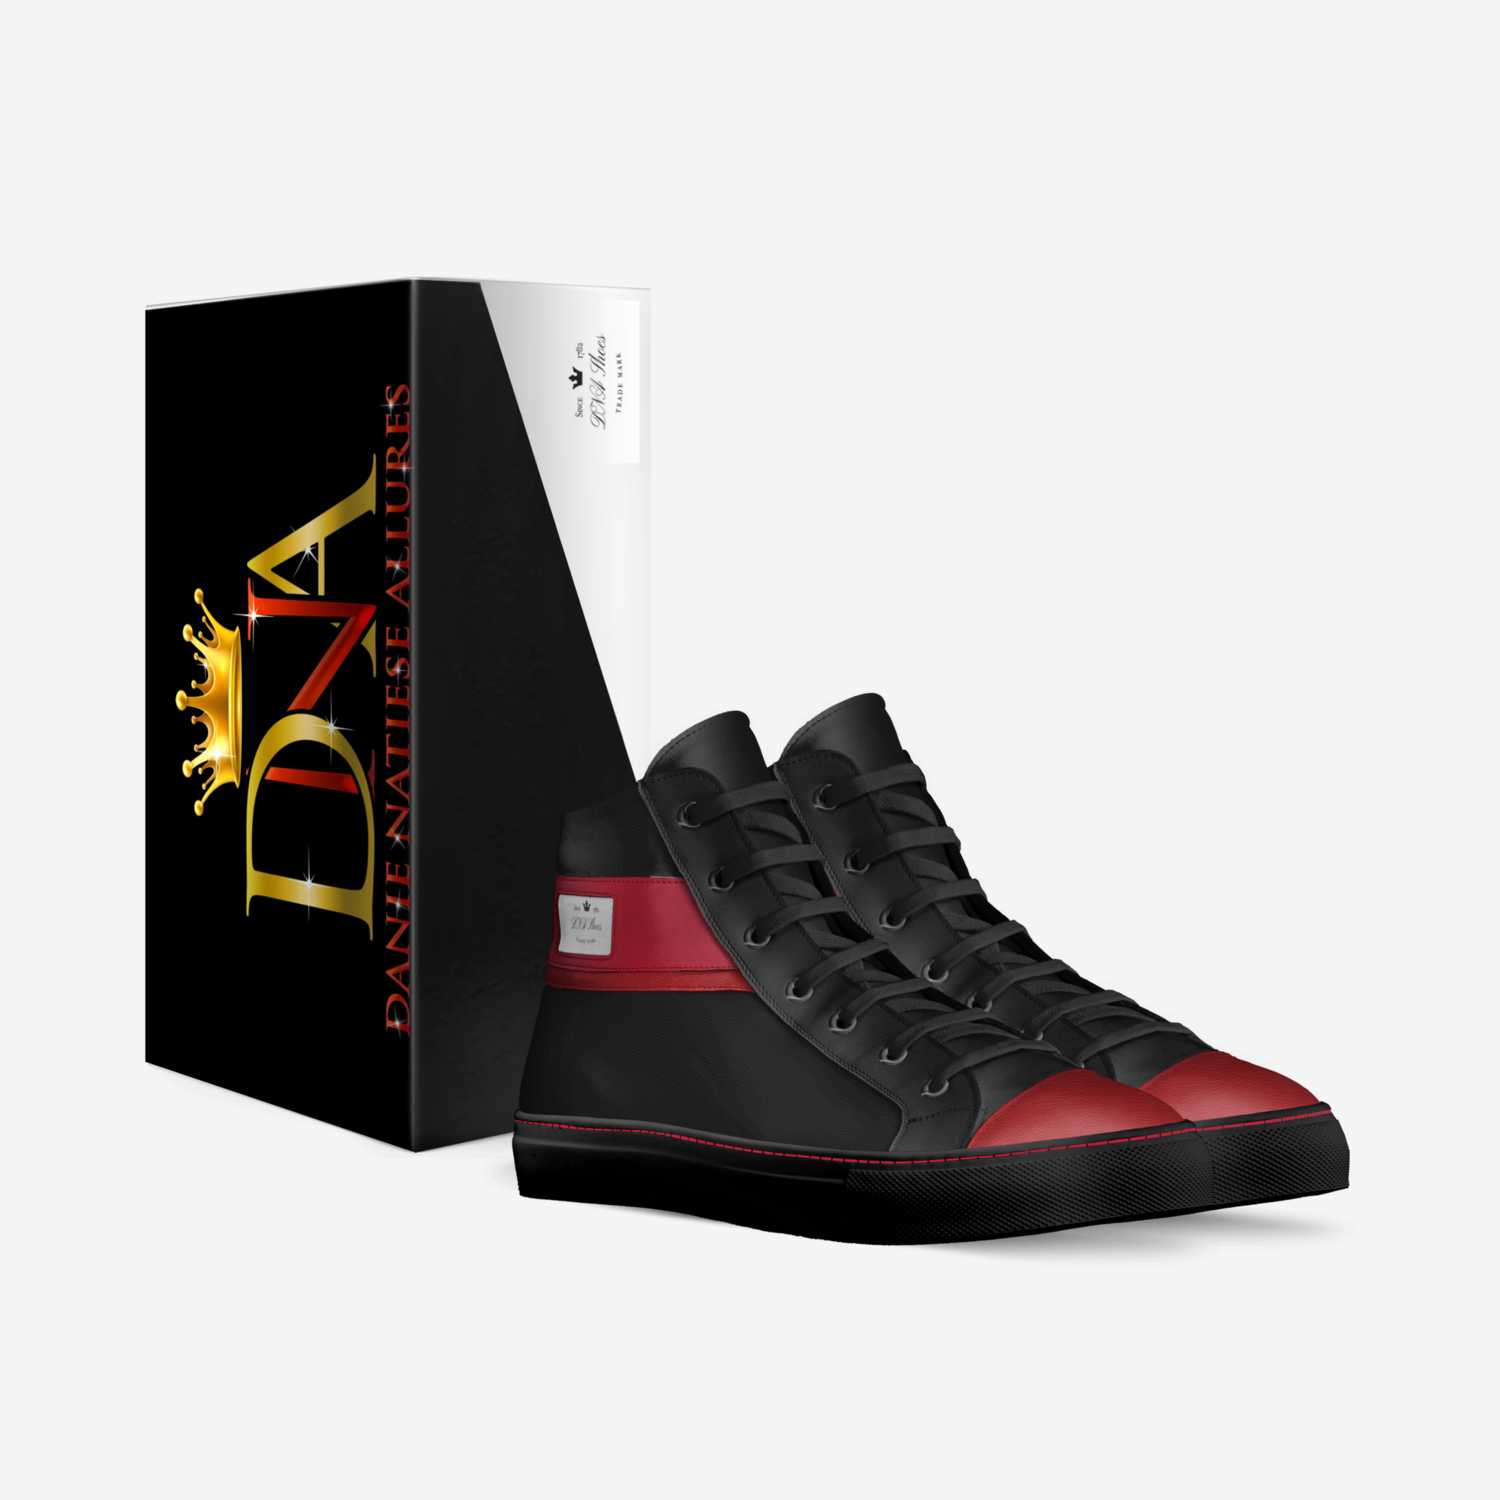 DNA Shoes custom made in Italy shoes by Danielle Natiese Nichols | Box view